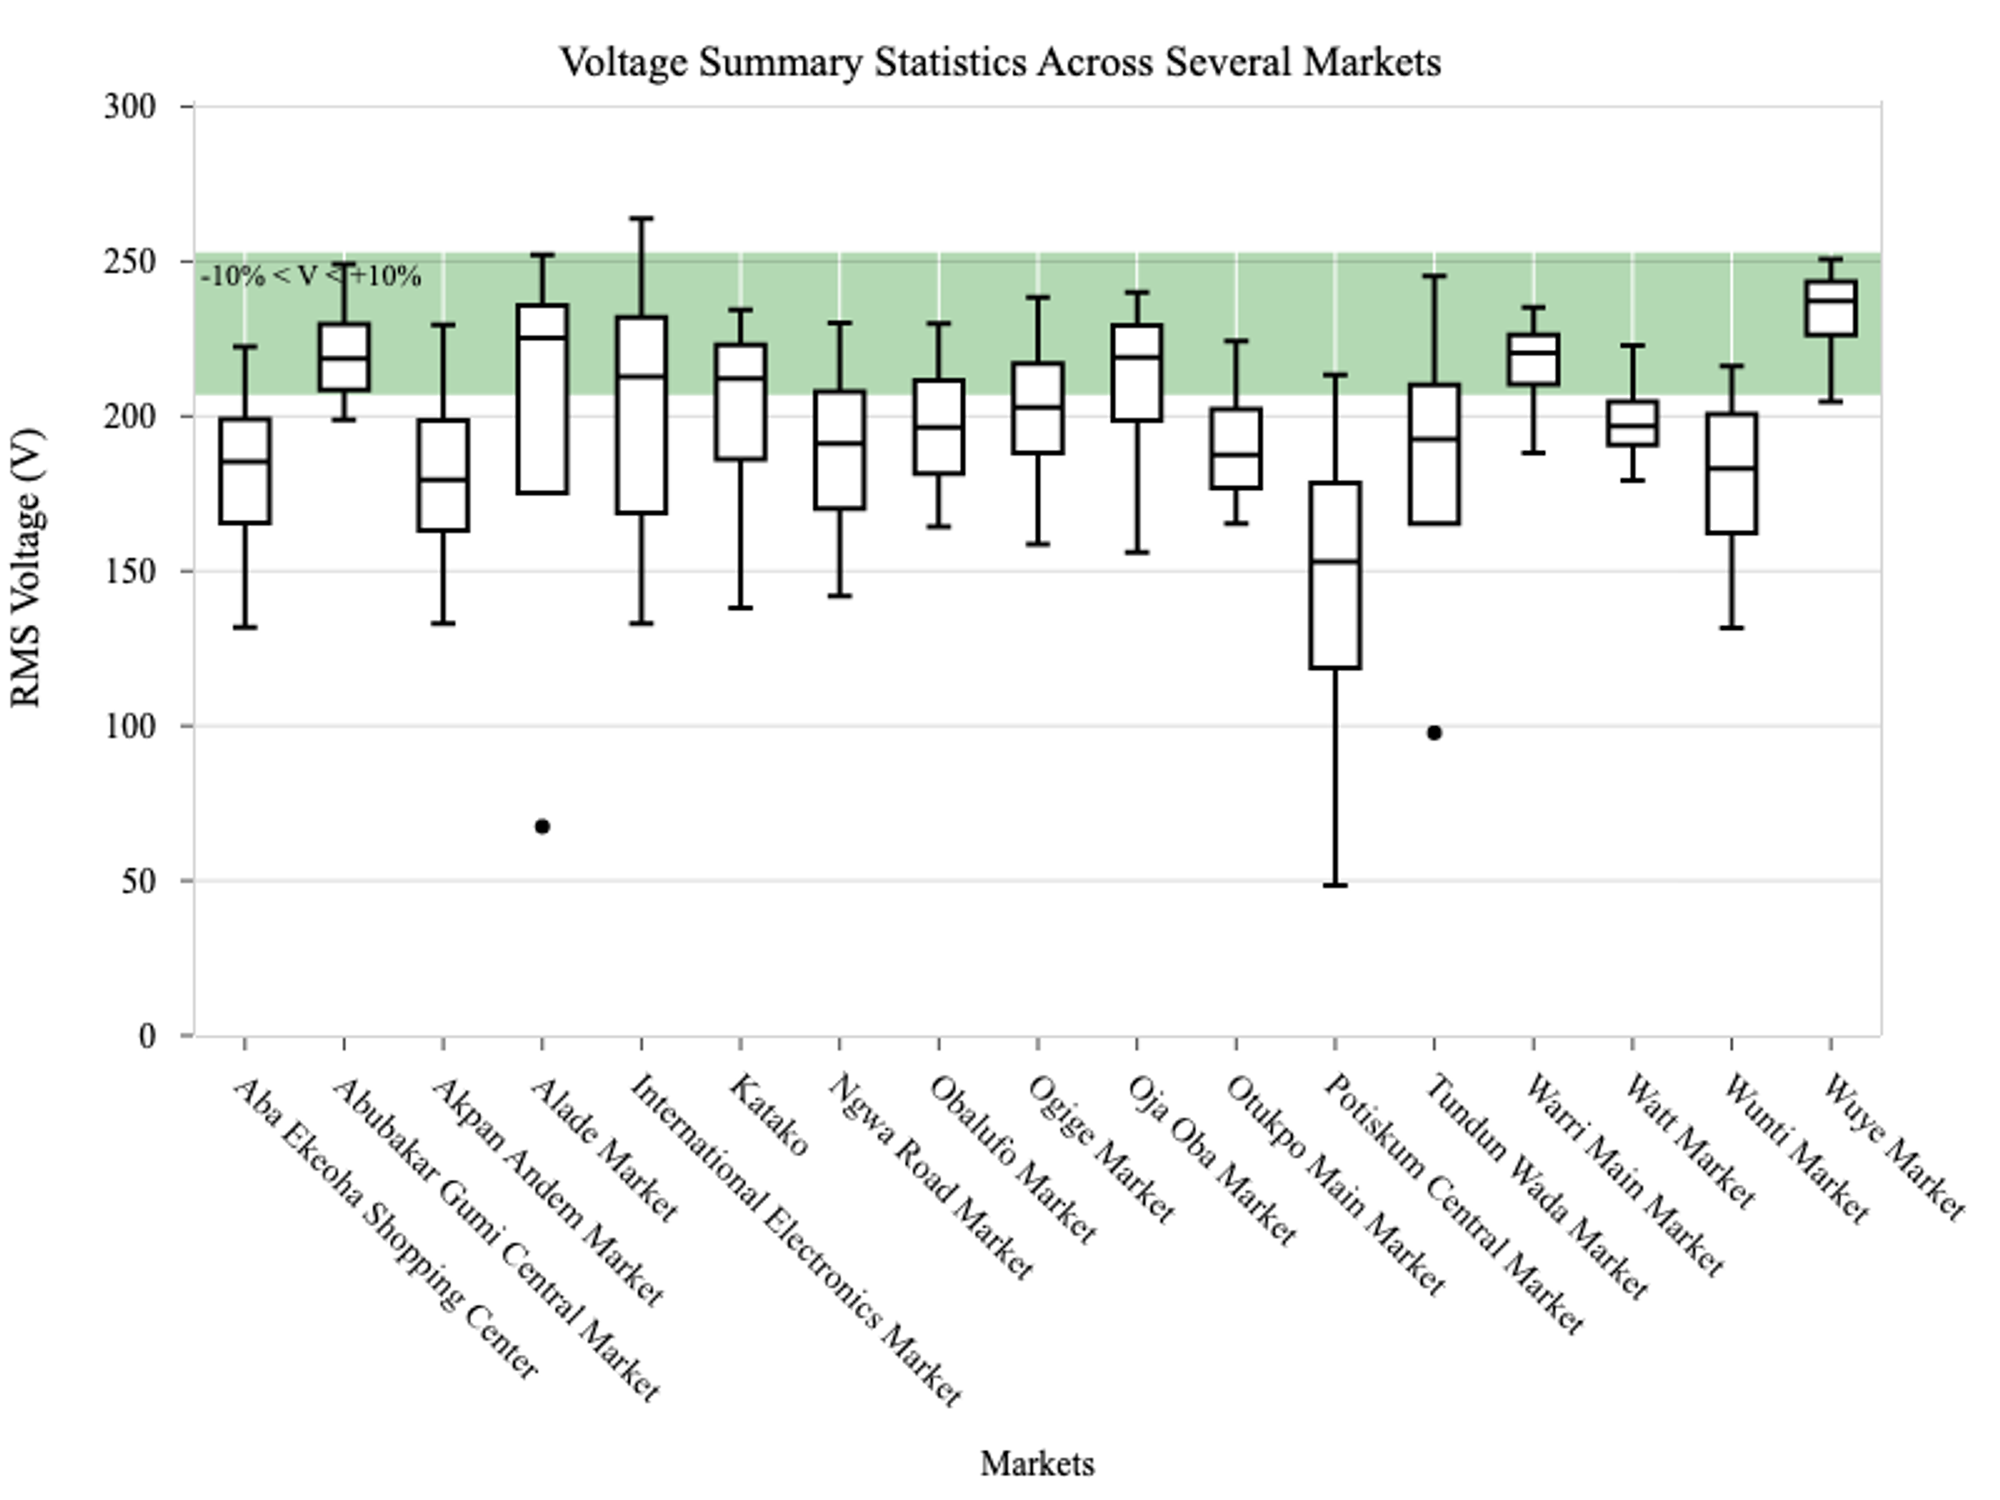 Figure 12: Voltage summary statistics across 17 markets, with “outage” voltages (below 23V), removed. The green region of the plot portrays the ±10% recommended voltage tolerance window. All these 17 markets have different voltage characteristics, most of which seem to consistently experience low voltage.